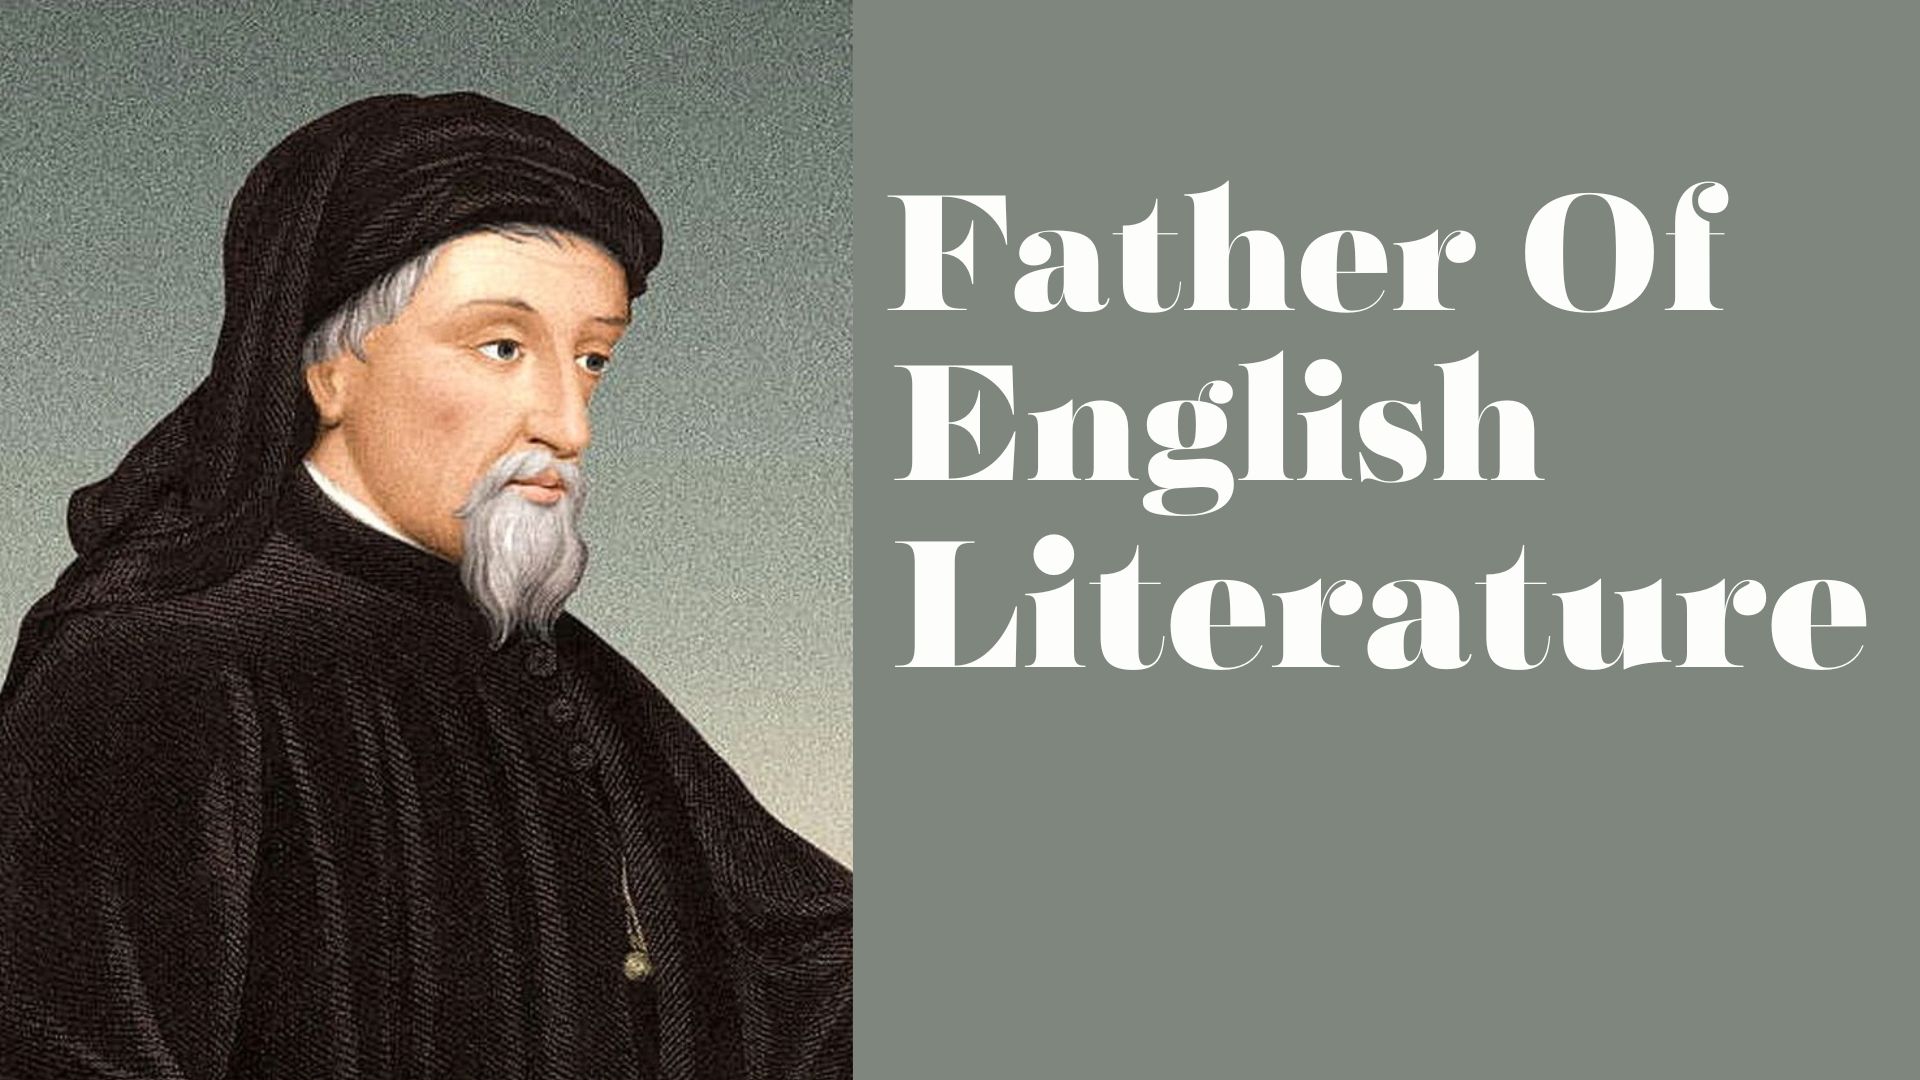 Who Is The Father Of English Literature